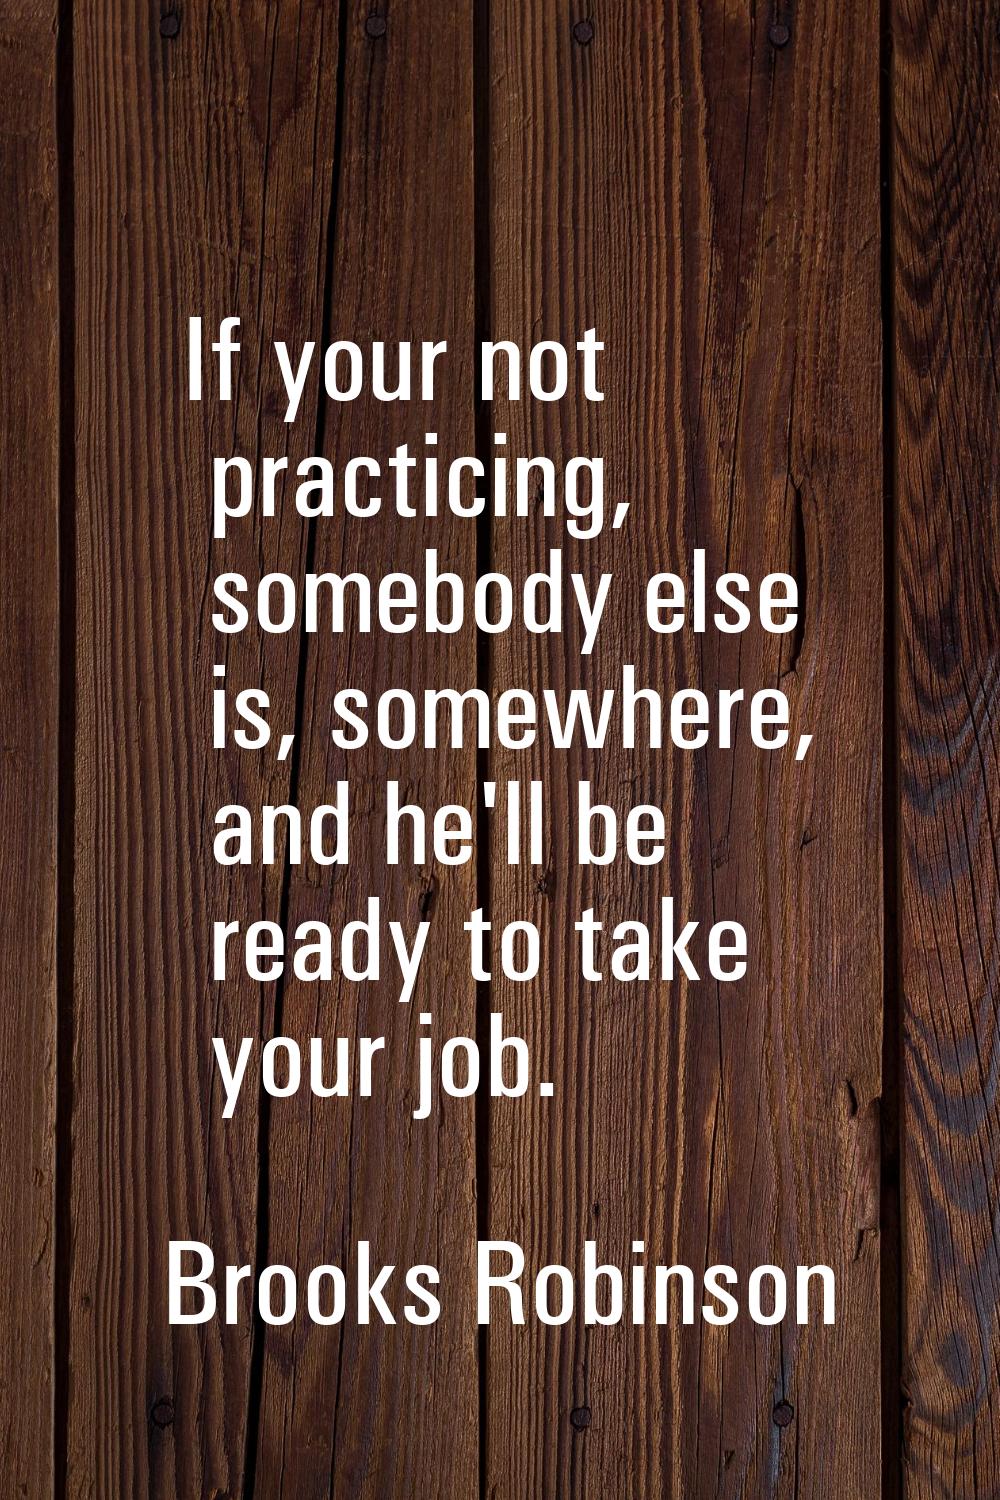 If your not practicing, somebody else is, somewhere, and he'll be ready to take your job.